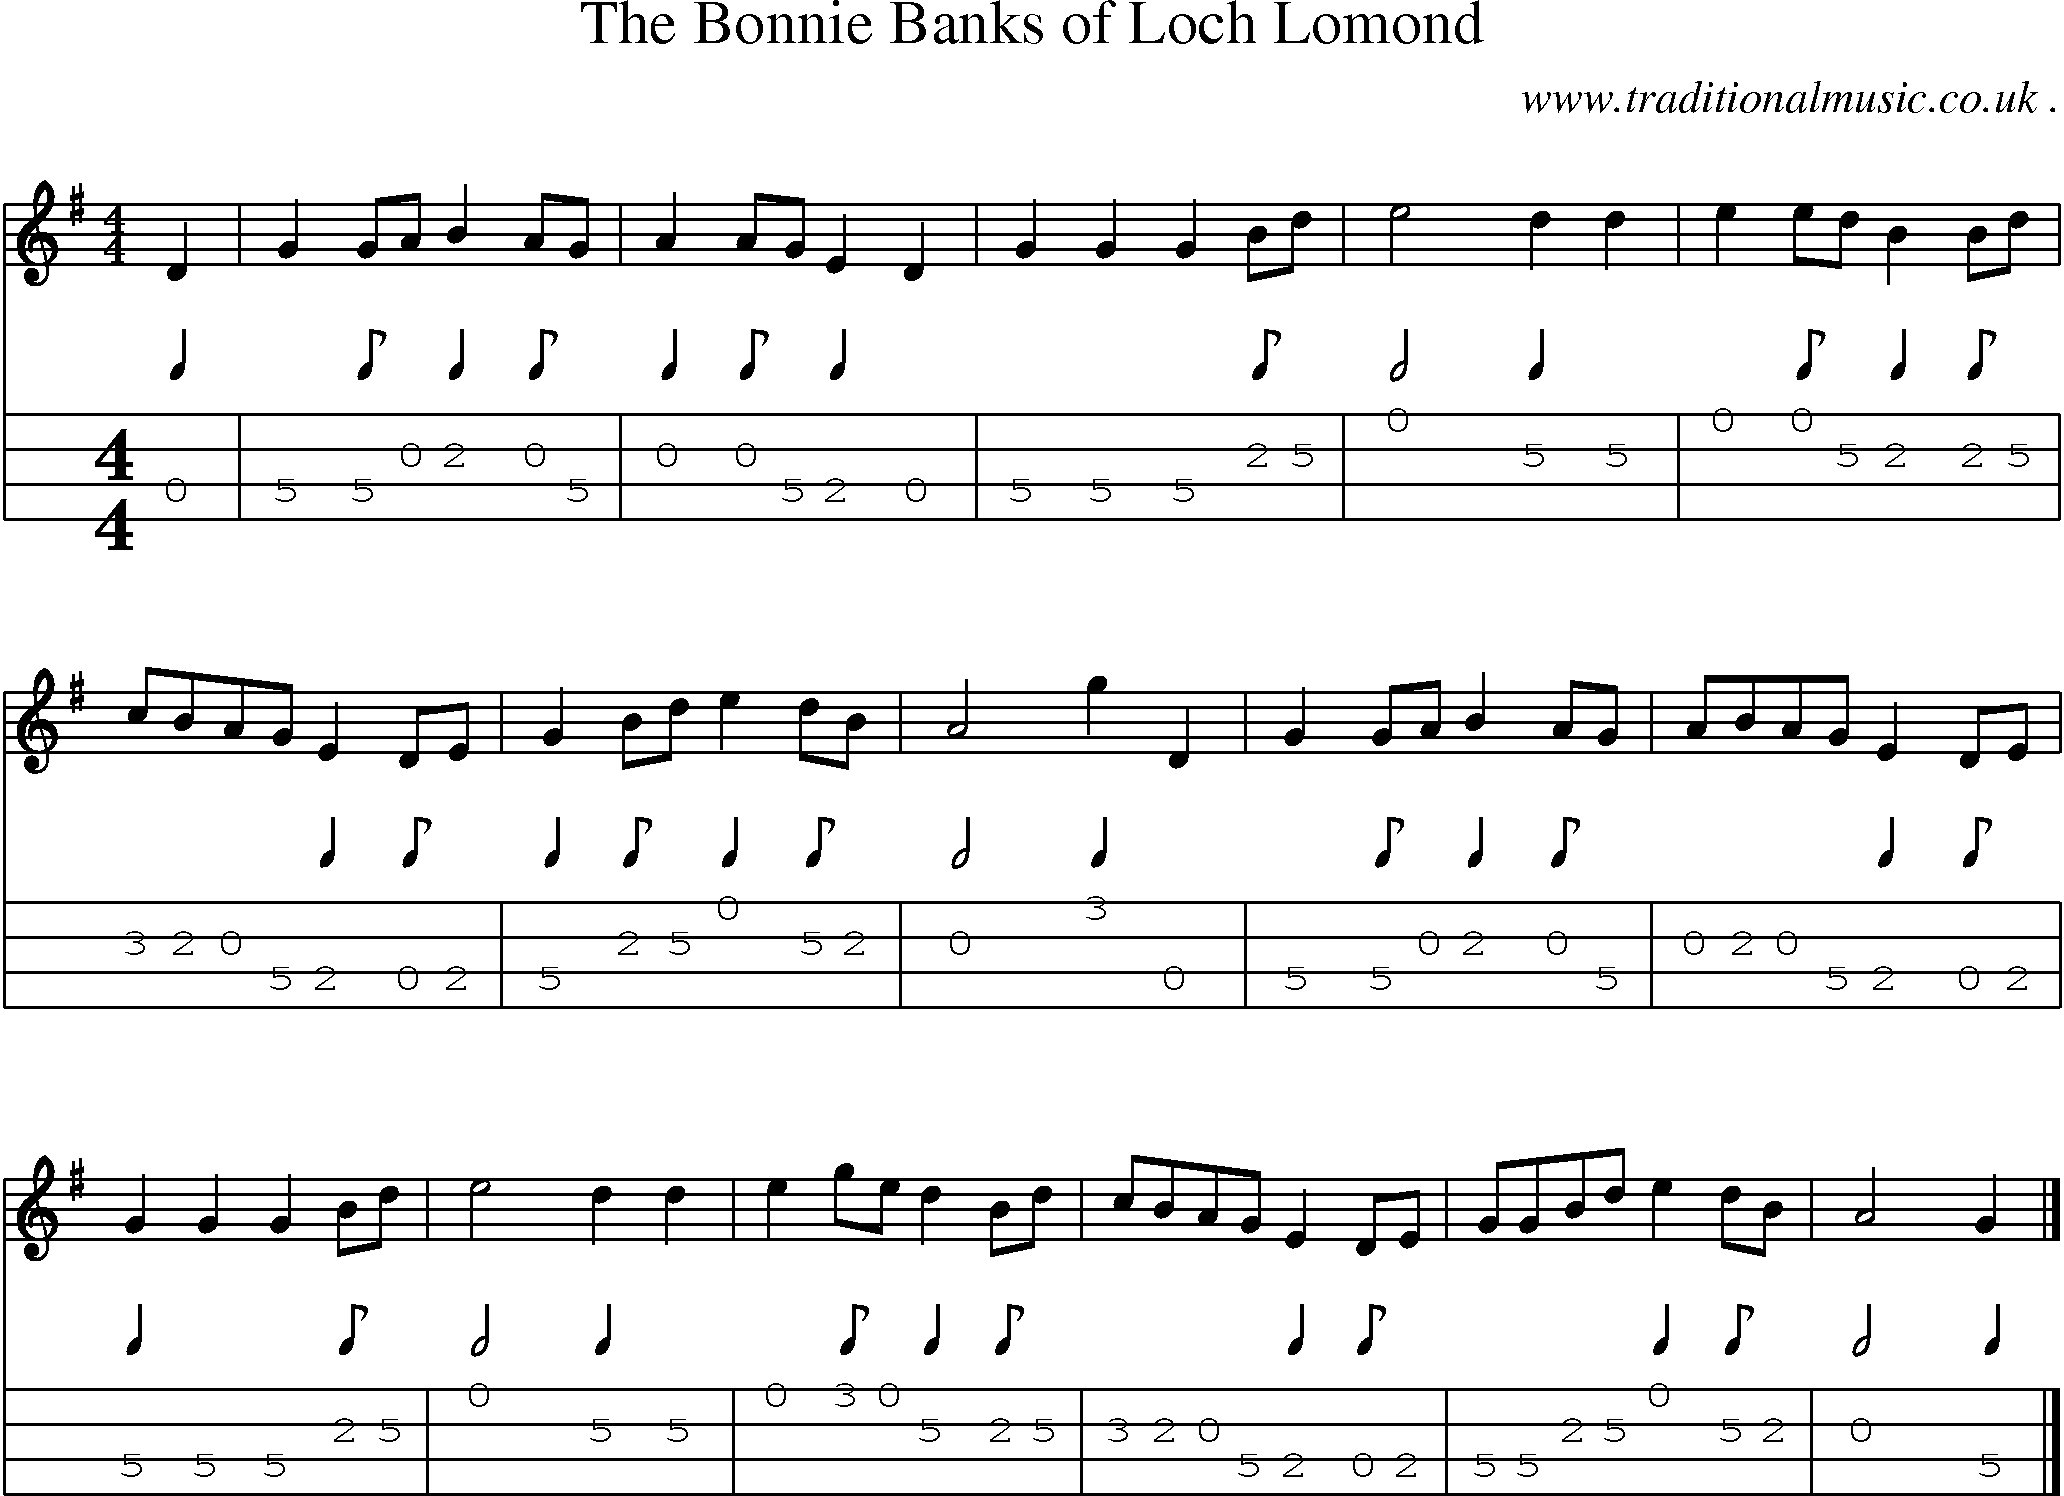 Sheet-music  score, Chords and Mandolin Tabs for The Bonnie Banks Of Loch Lomond